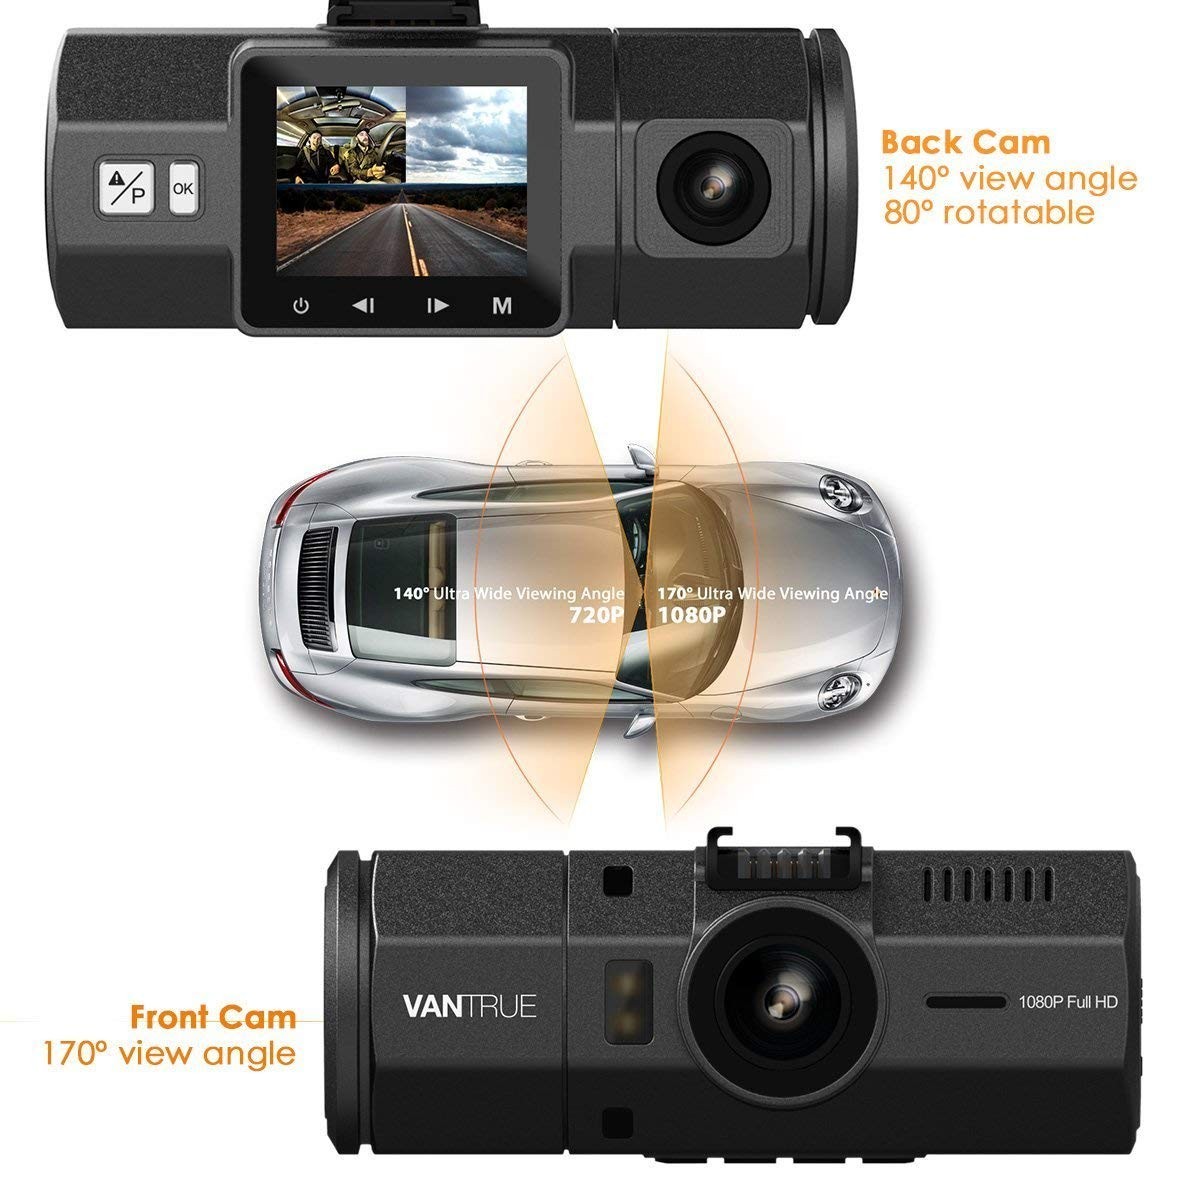 Don't hit the road this summer without one of VANTRUE's 1080p/2.5K